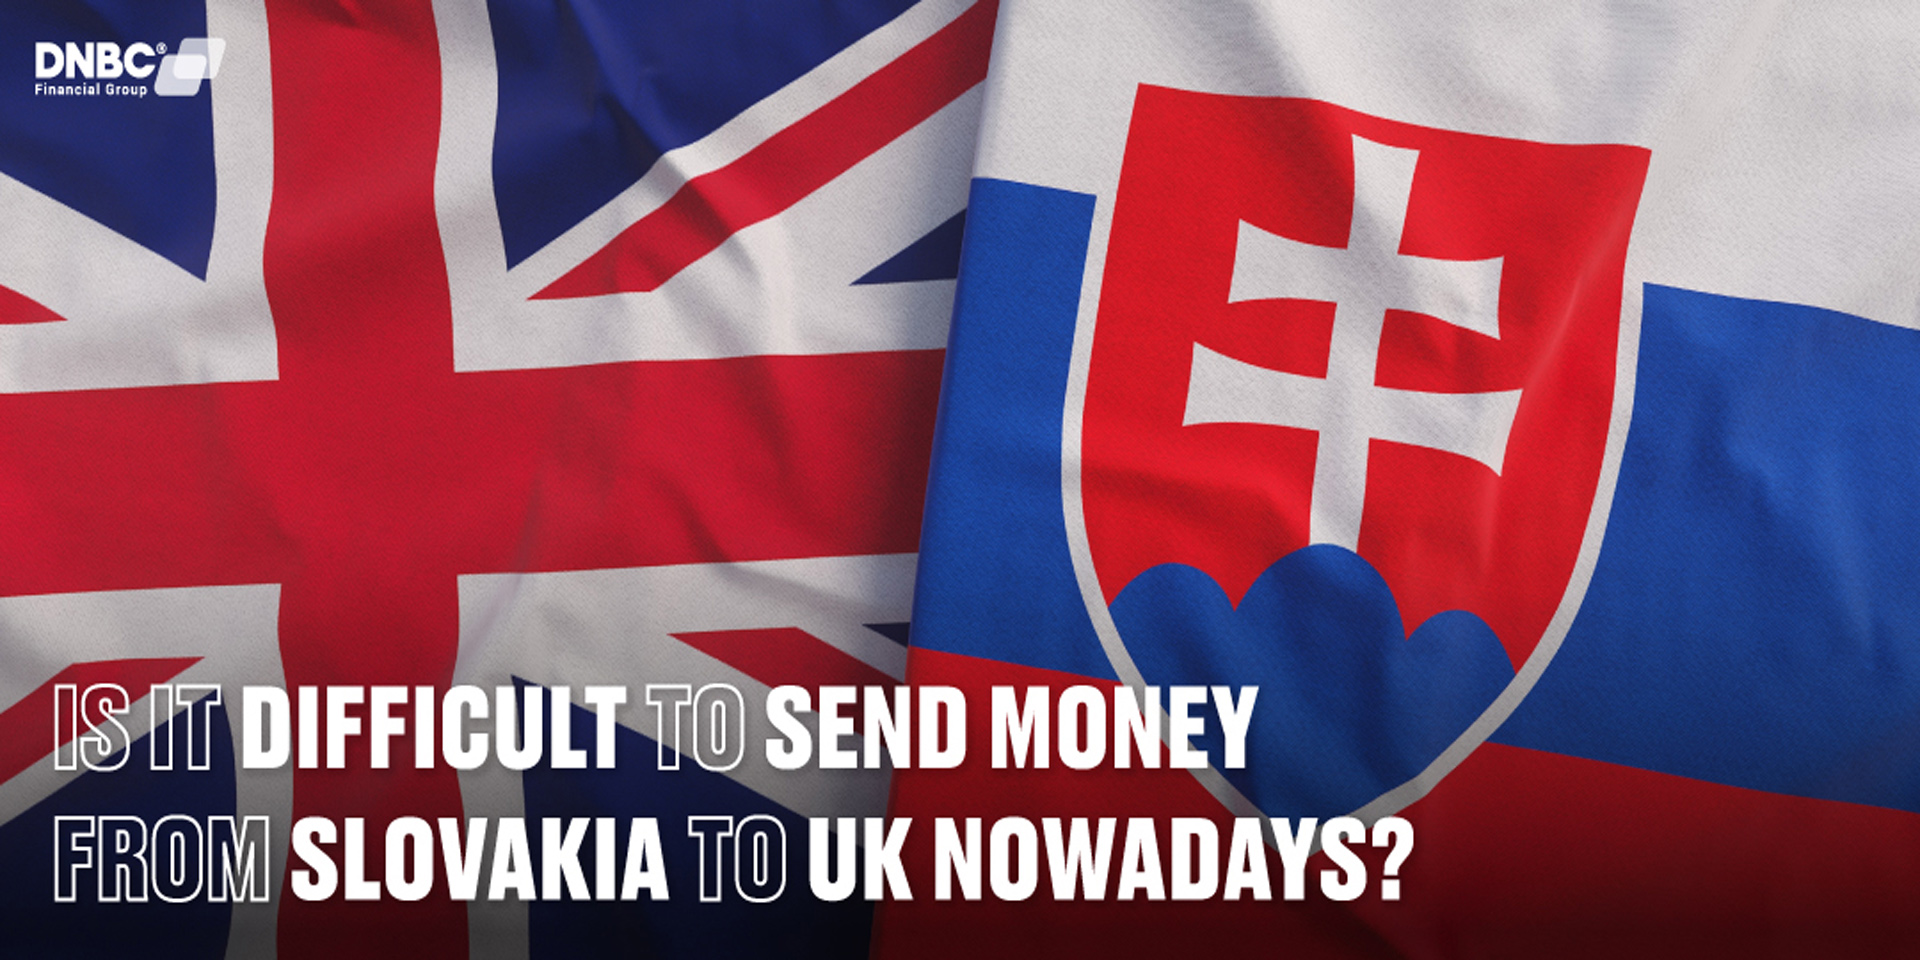 Is it difficult to send money from Slovakia to UK nowadays?